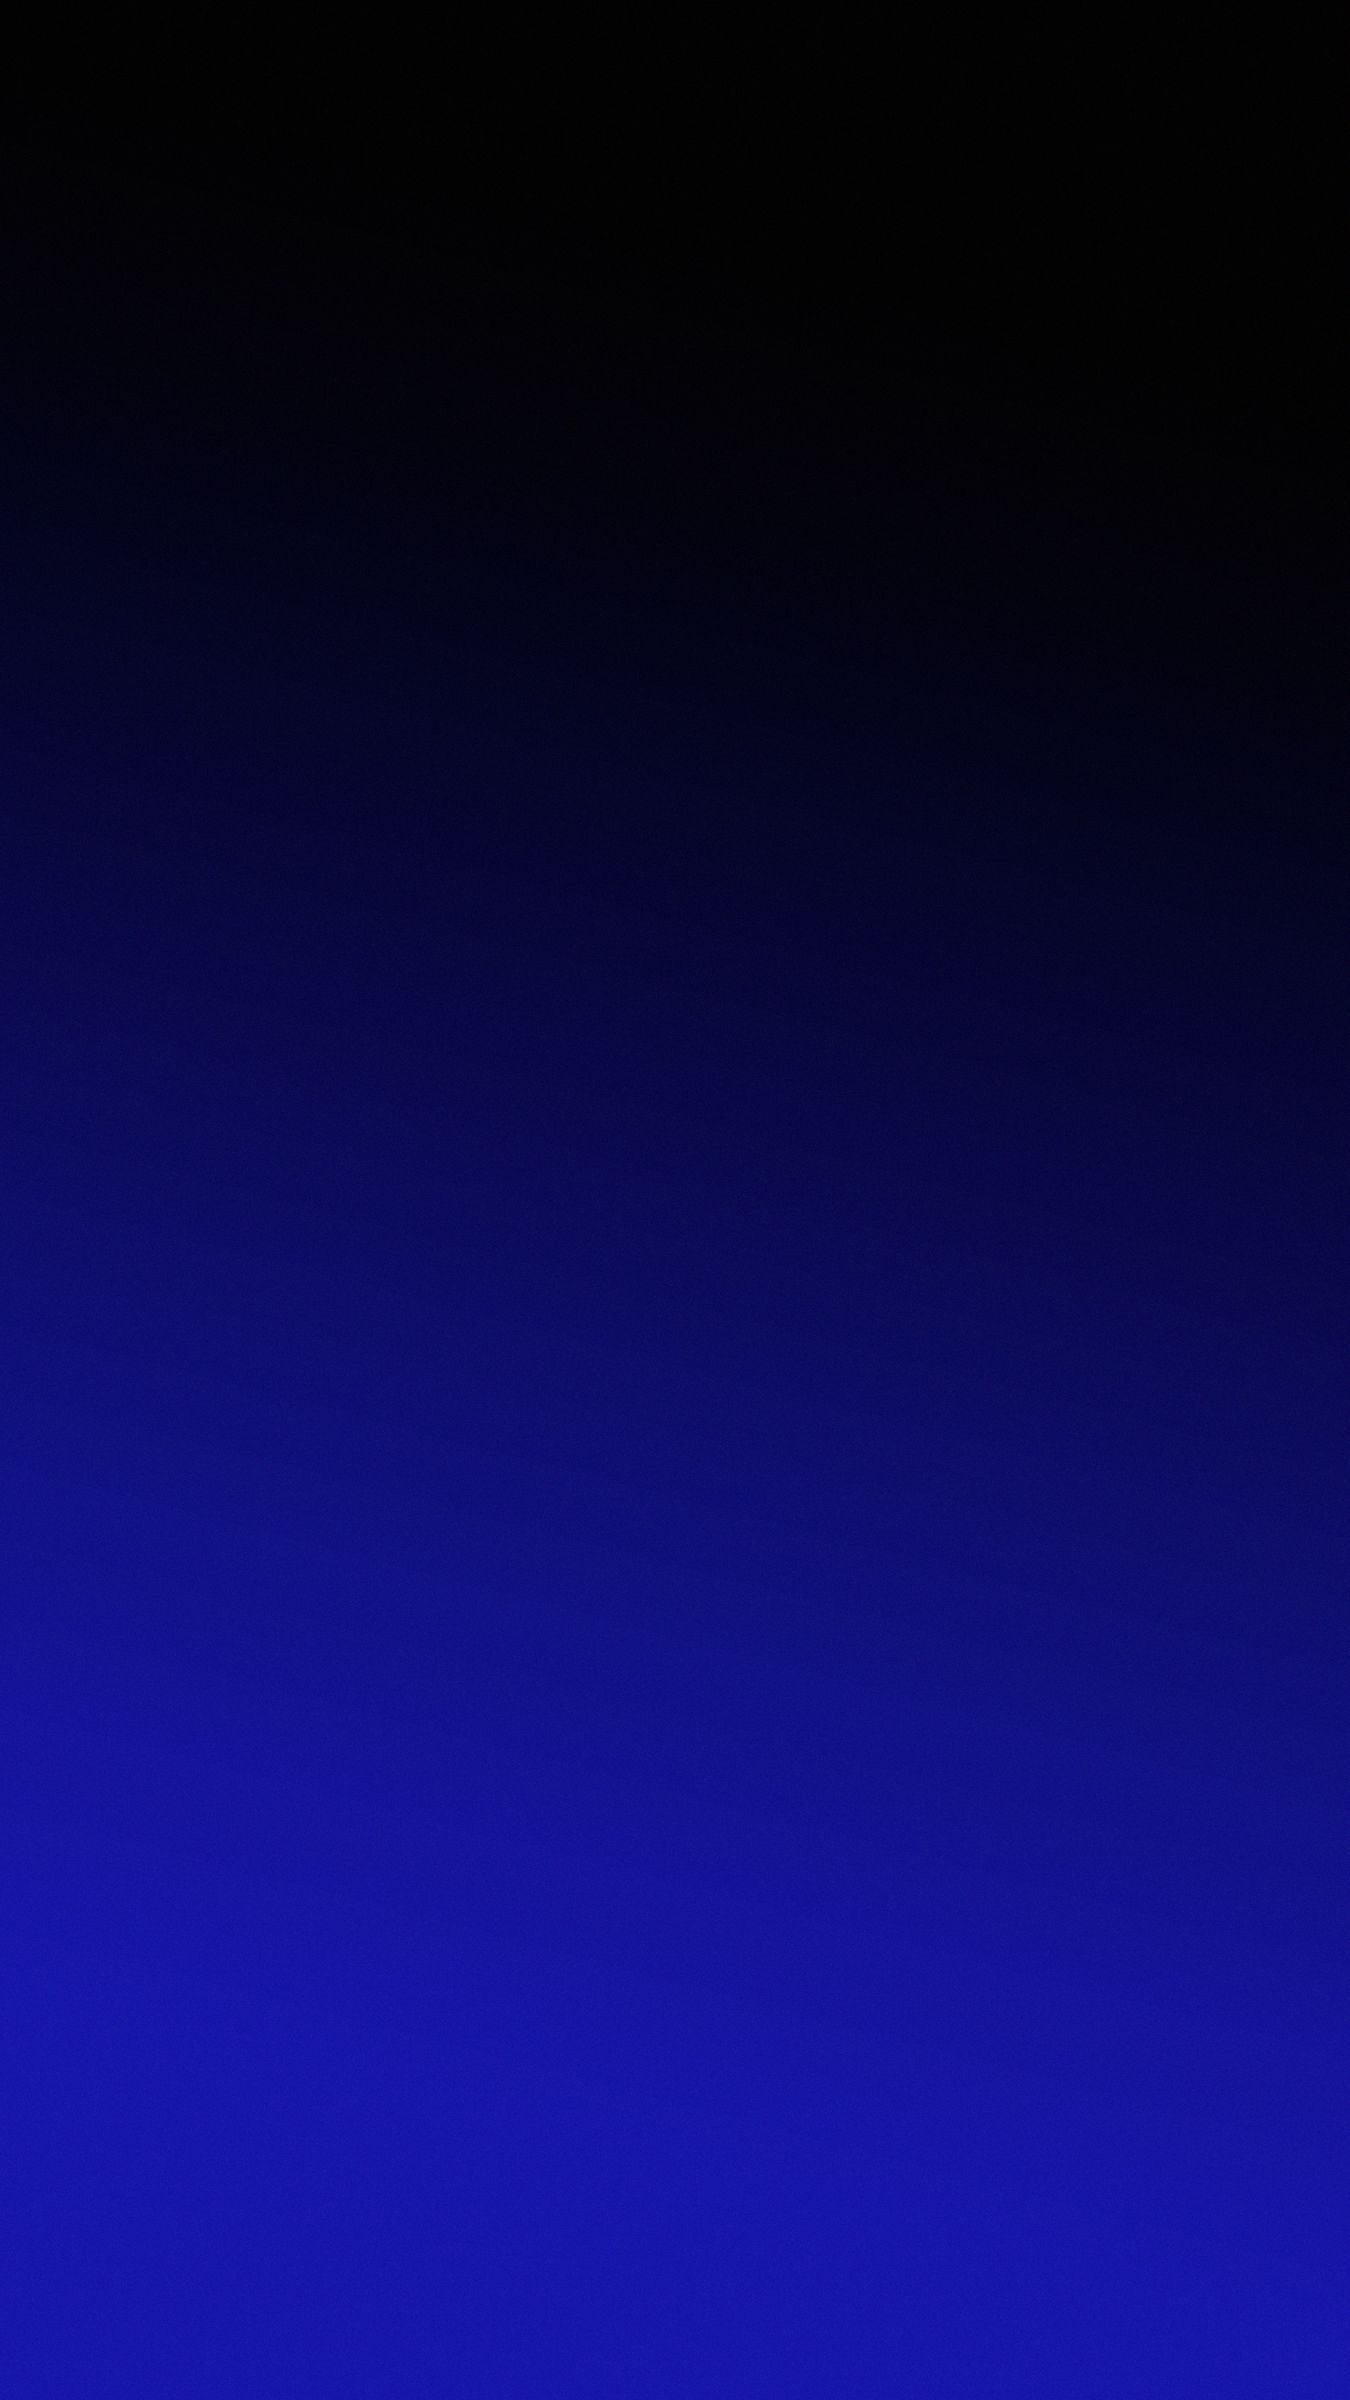 Download wallpaper 1350x2400 gradient color blue black iphone  876s6 for parallax hd background